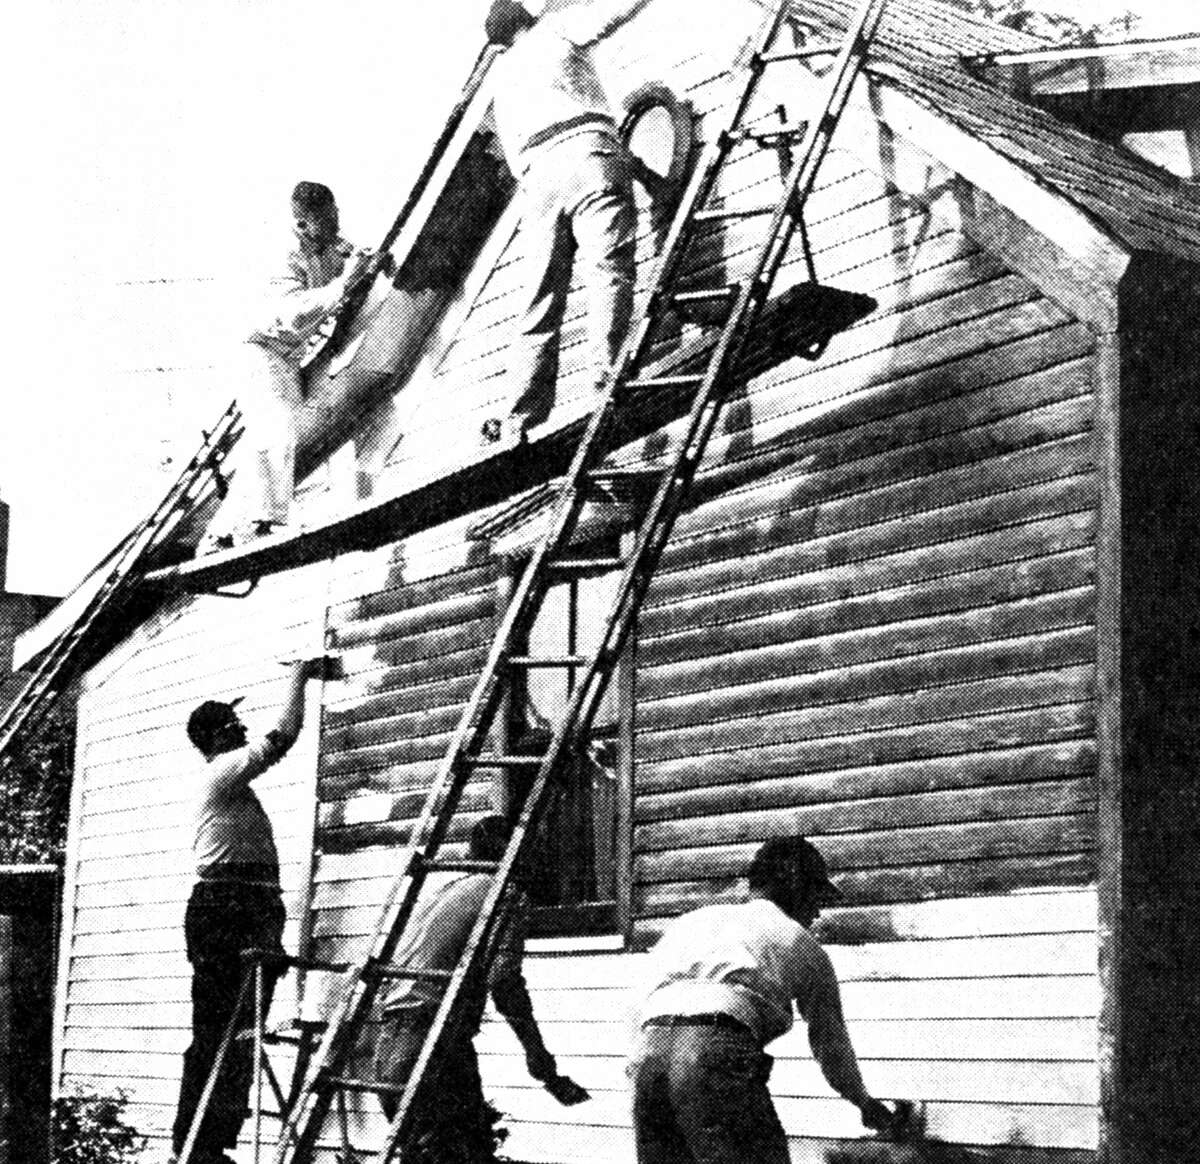 The Manistee Jaycees started the first of their new projects for summer and fall with a community improvement project in Manistee painting the house on the corner of Ninth and High streets last evening. The photo was published in the News Advocate on June 21, 1962.